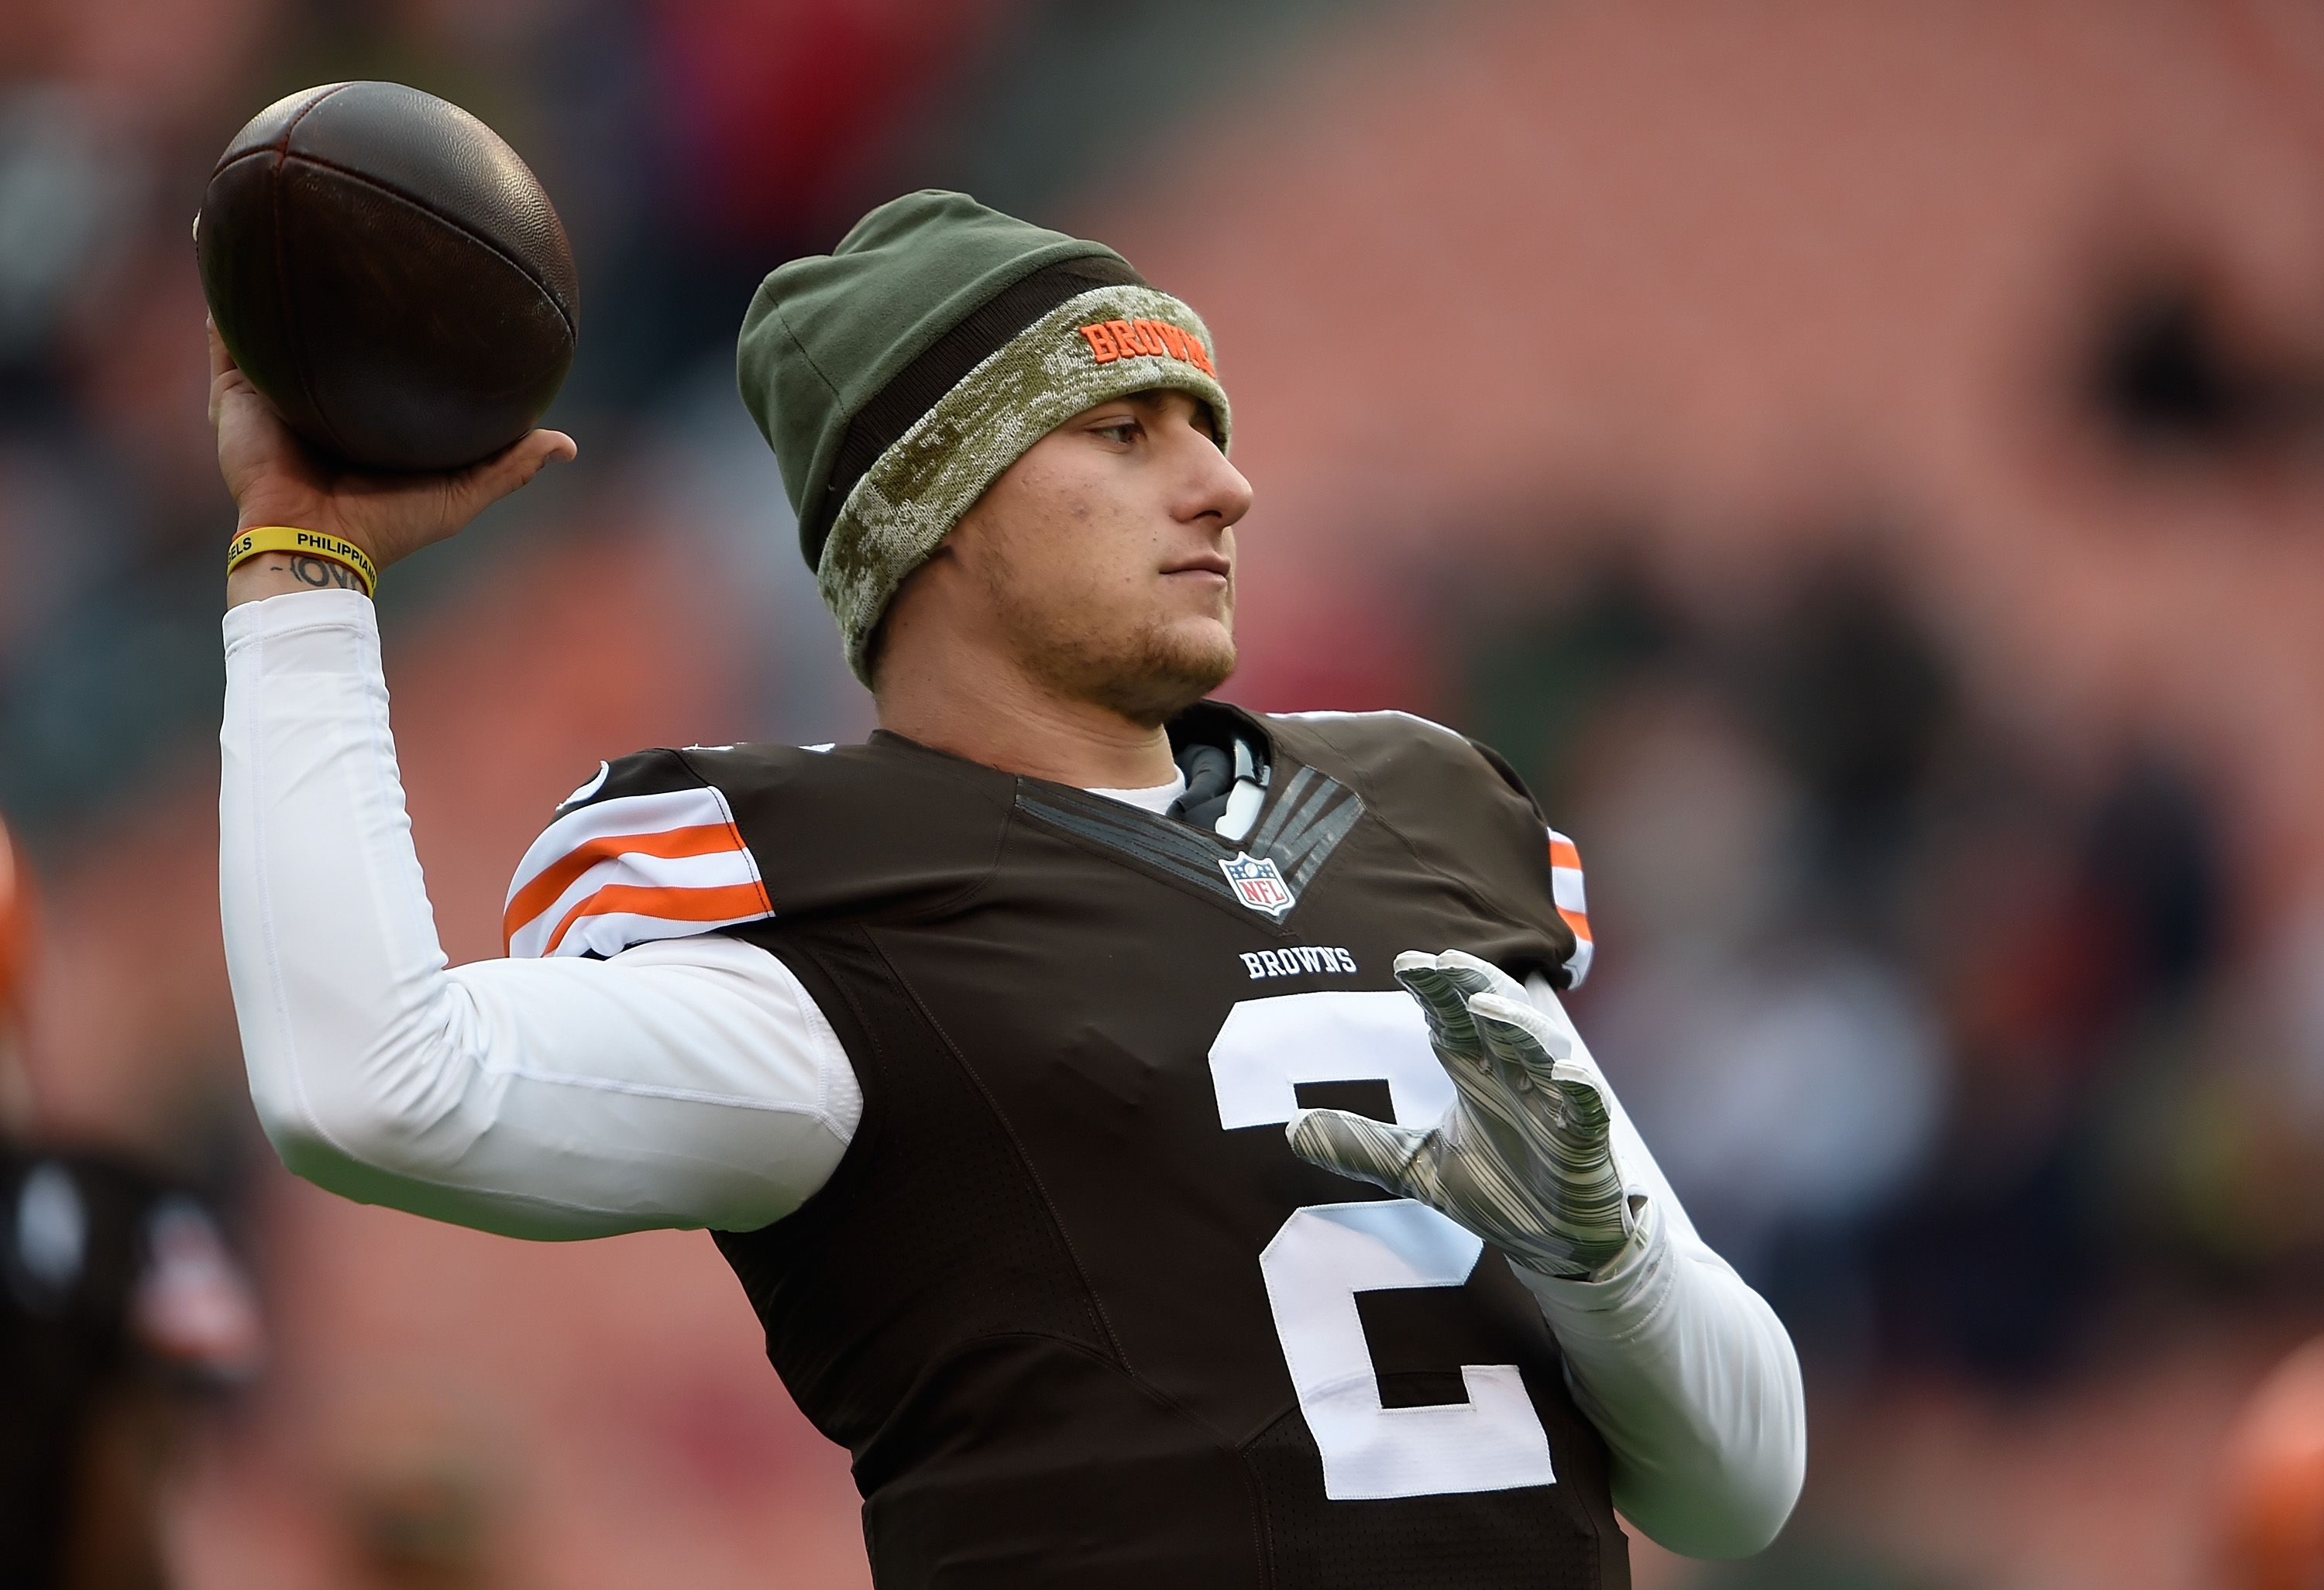 Johnny Manziel cut by Cleveland Browns